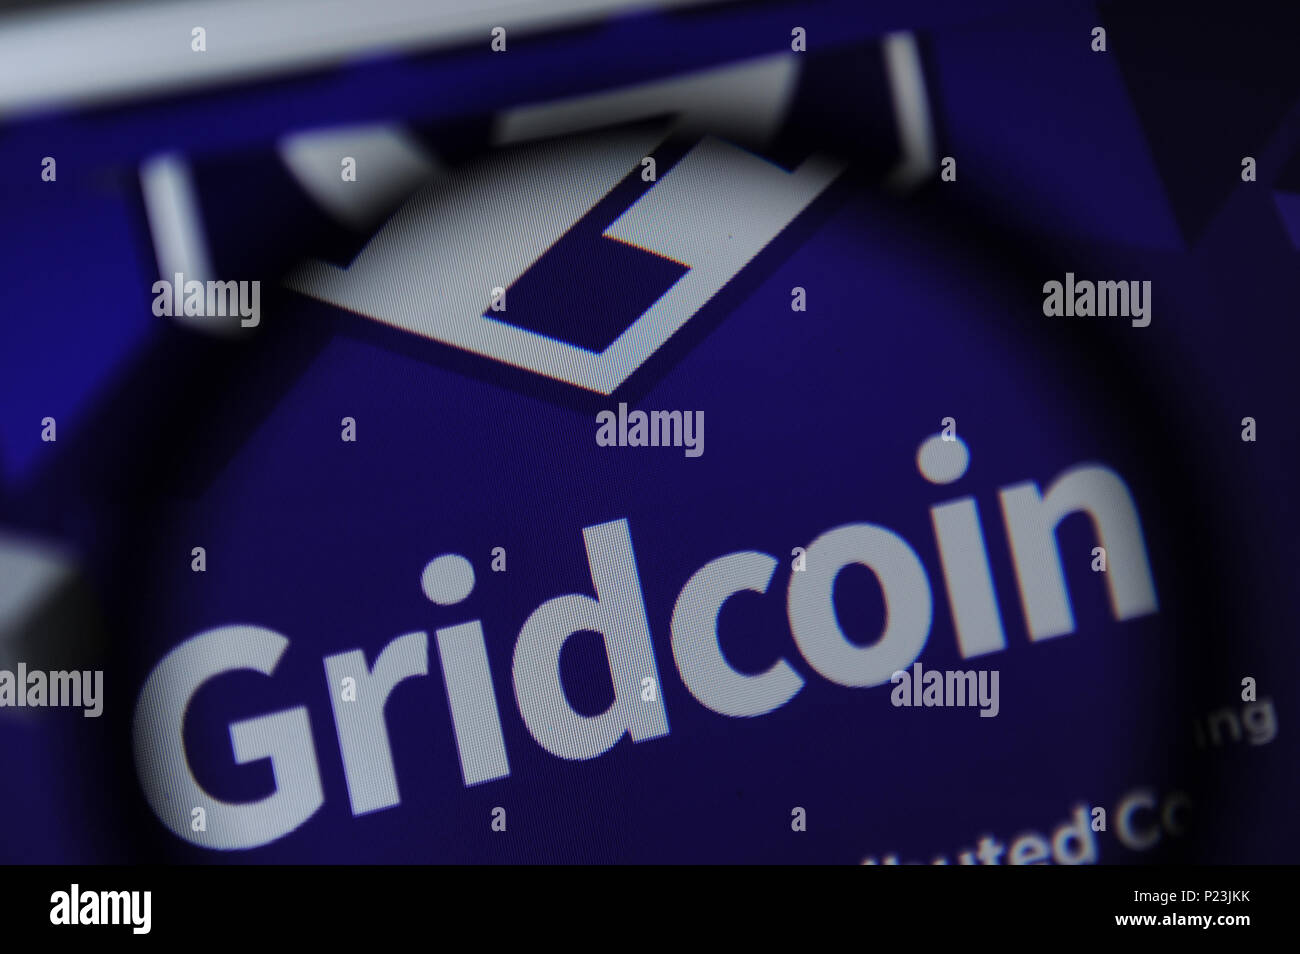 Die Gridcoin cryptocurrency Website Stockfoto